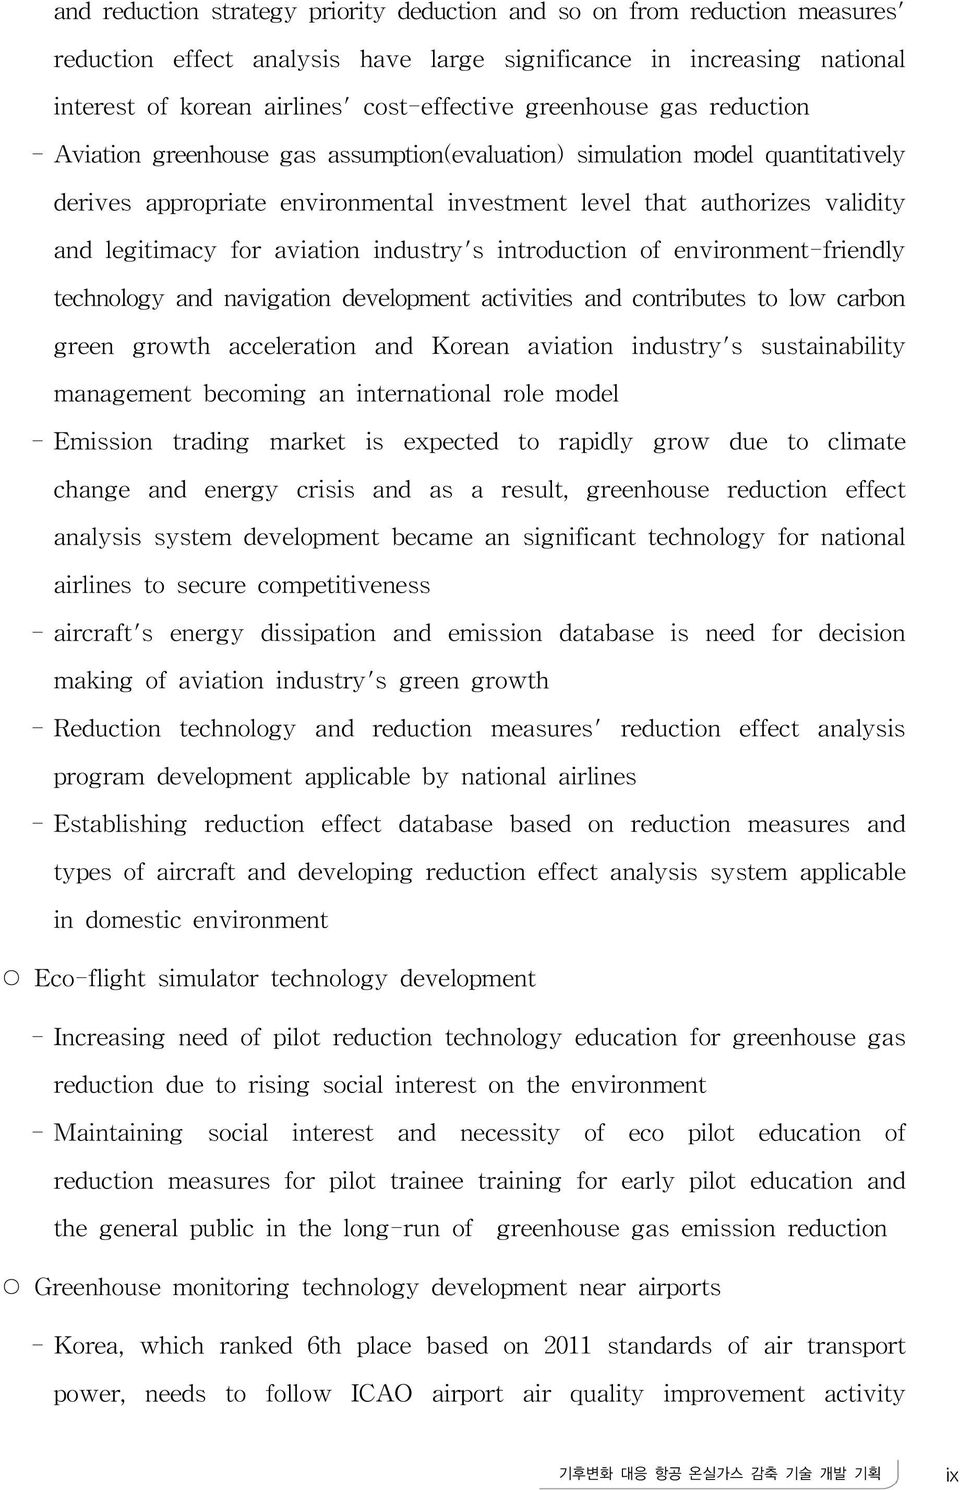 aviation industry's introduction of environment-friendly technology and navigation development activities and contributes to low carbon green growth acceleration and Korean aviation industry's